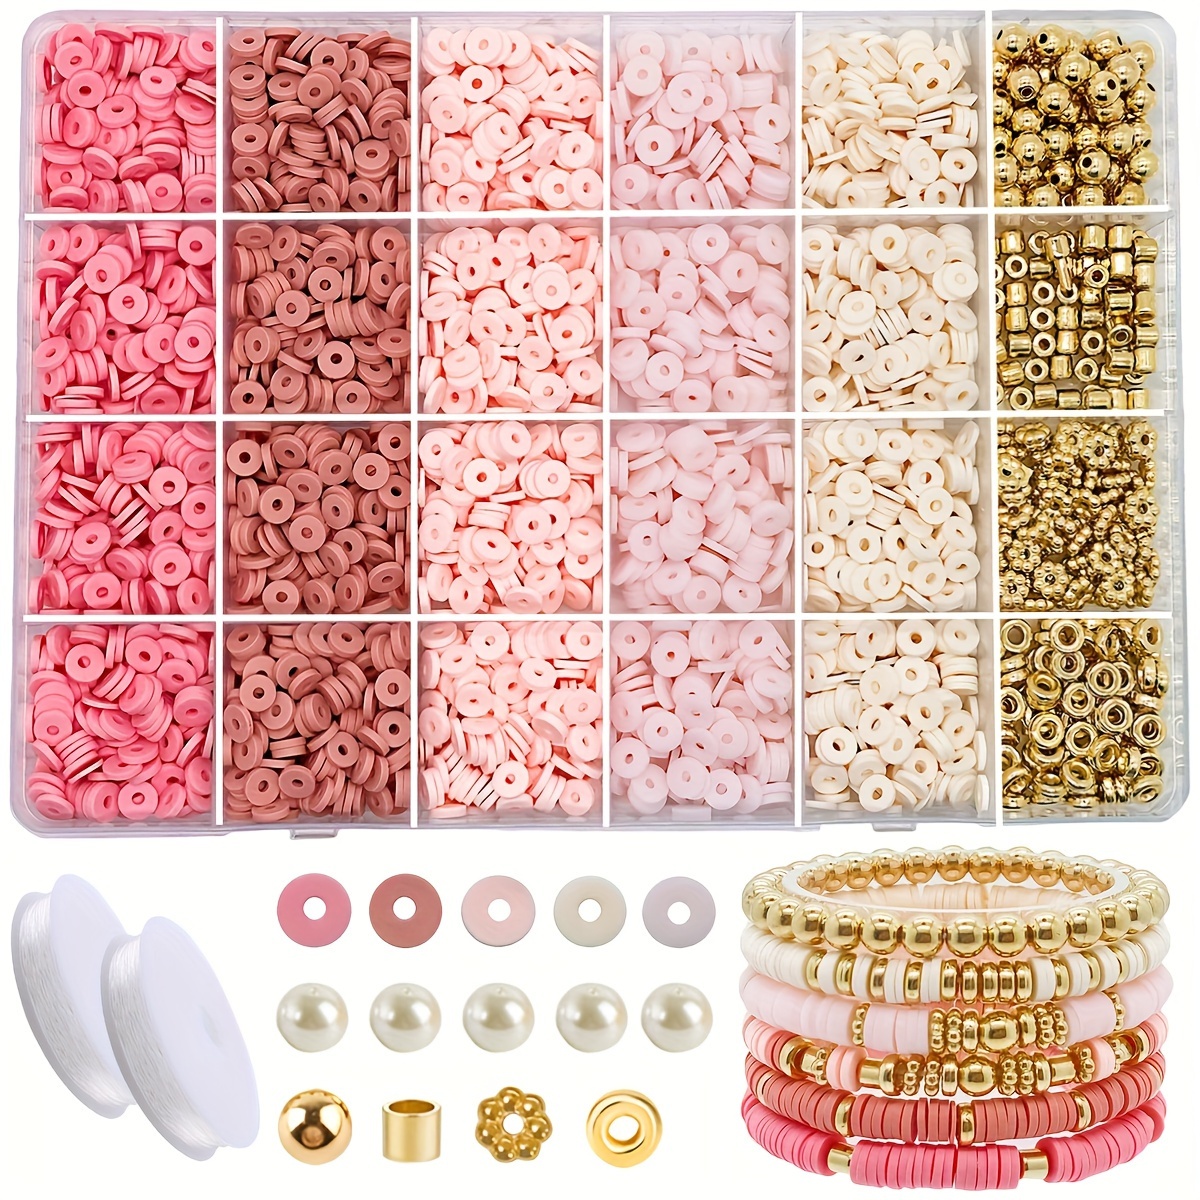 

2000pcs 6mm Polymer Clay Beads With 250pcs Golden Beads With Crystal Thread For Jewelry Making Diy Bracelet Necklace Earrings Beaded Craft Supplies